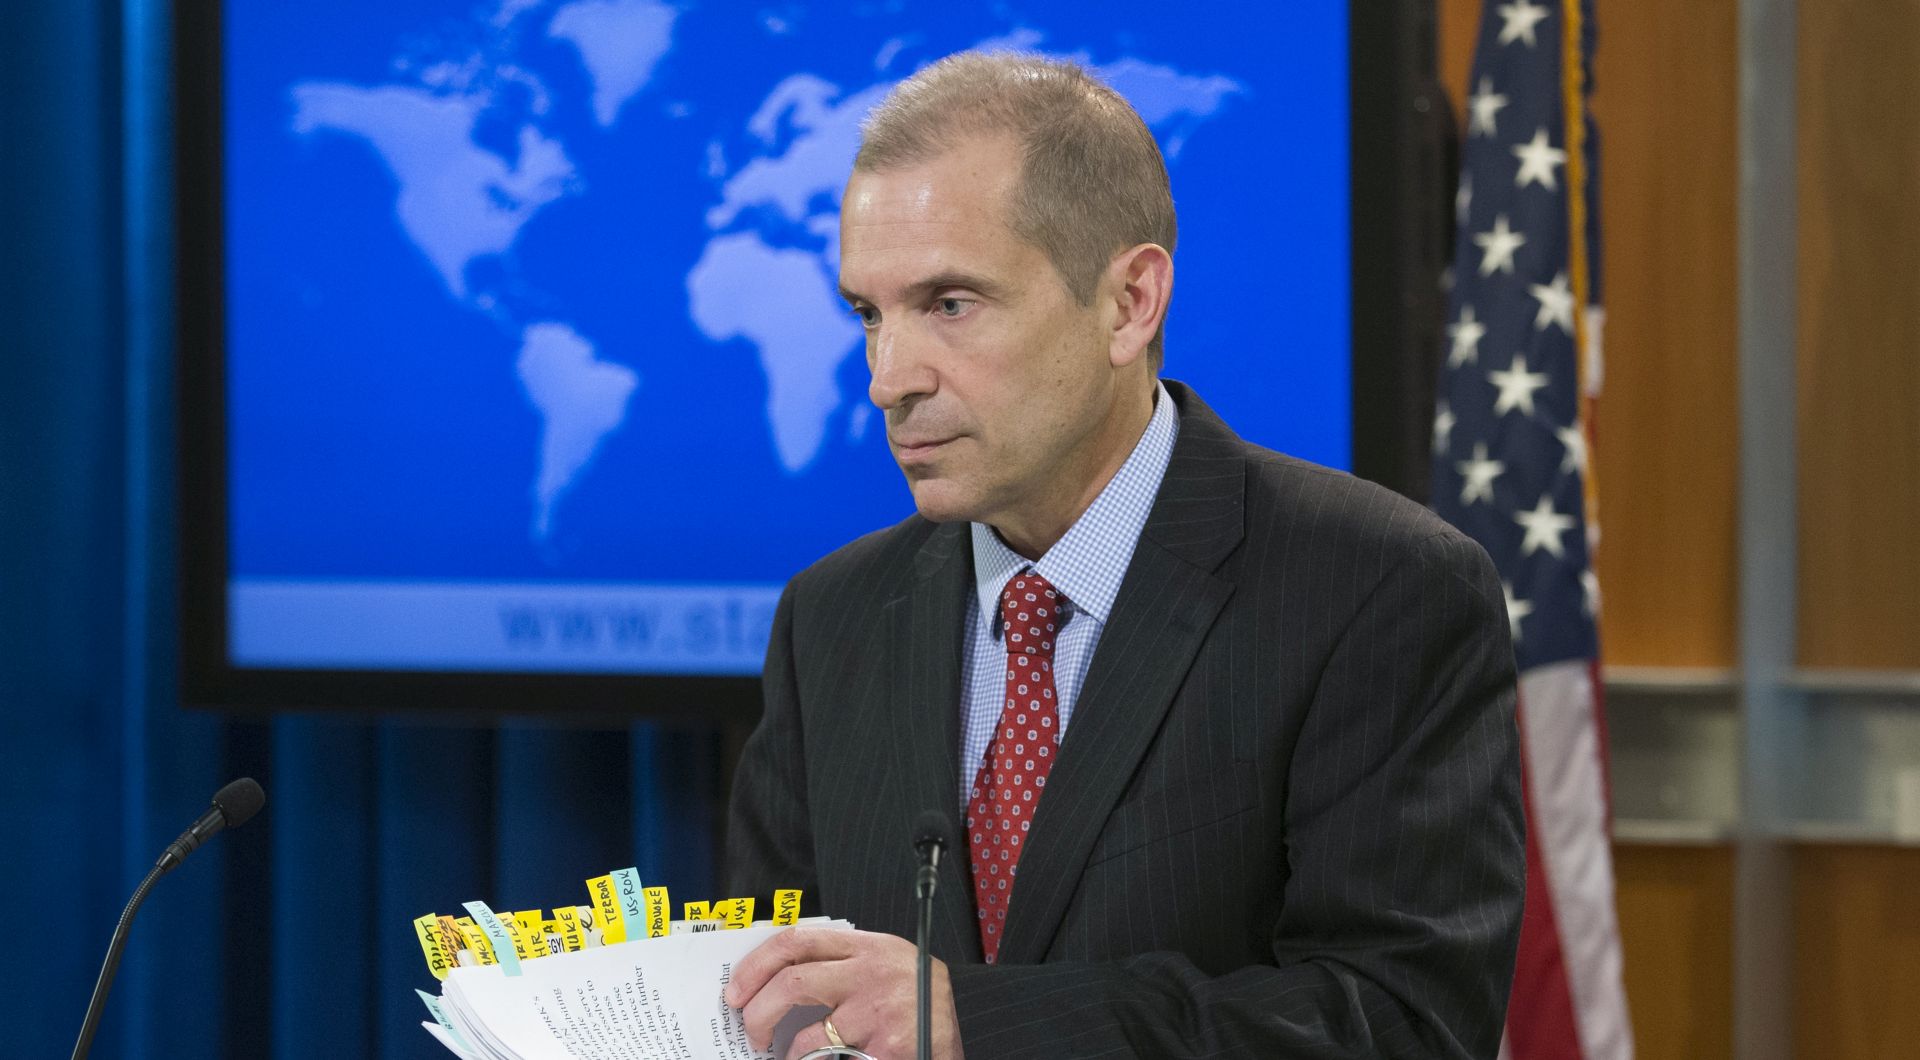 epa05835150 US State Department spokesperson Mark Toner holds a news conference at the State Department in Washington, DC, USA, 07 March 2017.  EPA/MICHAEL REYNOLDS